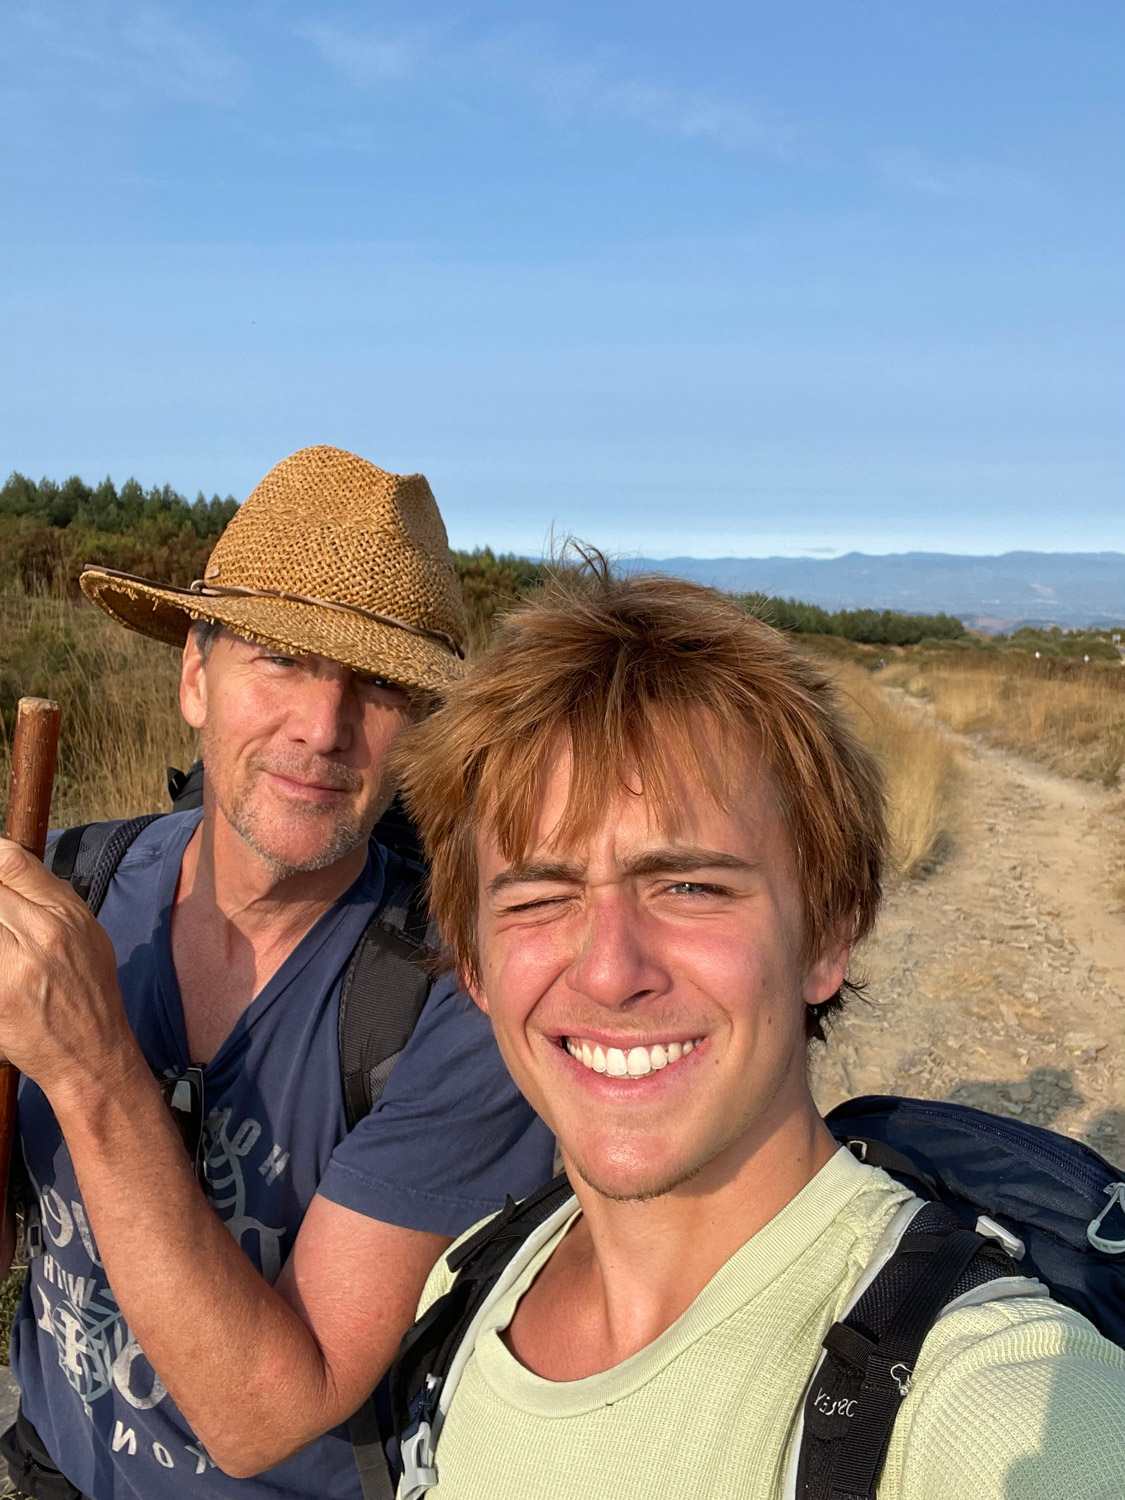 Andrew McCarthy and his son Sam on the trail